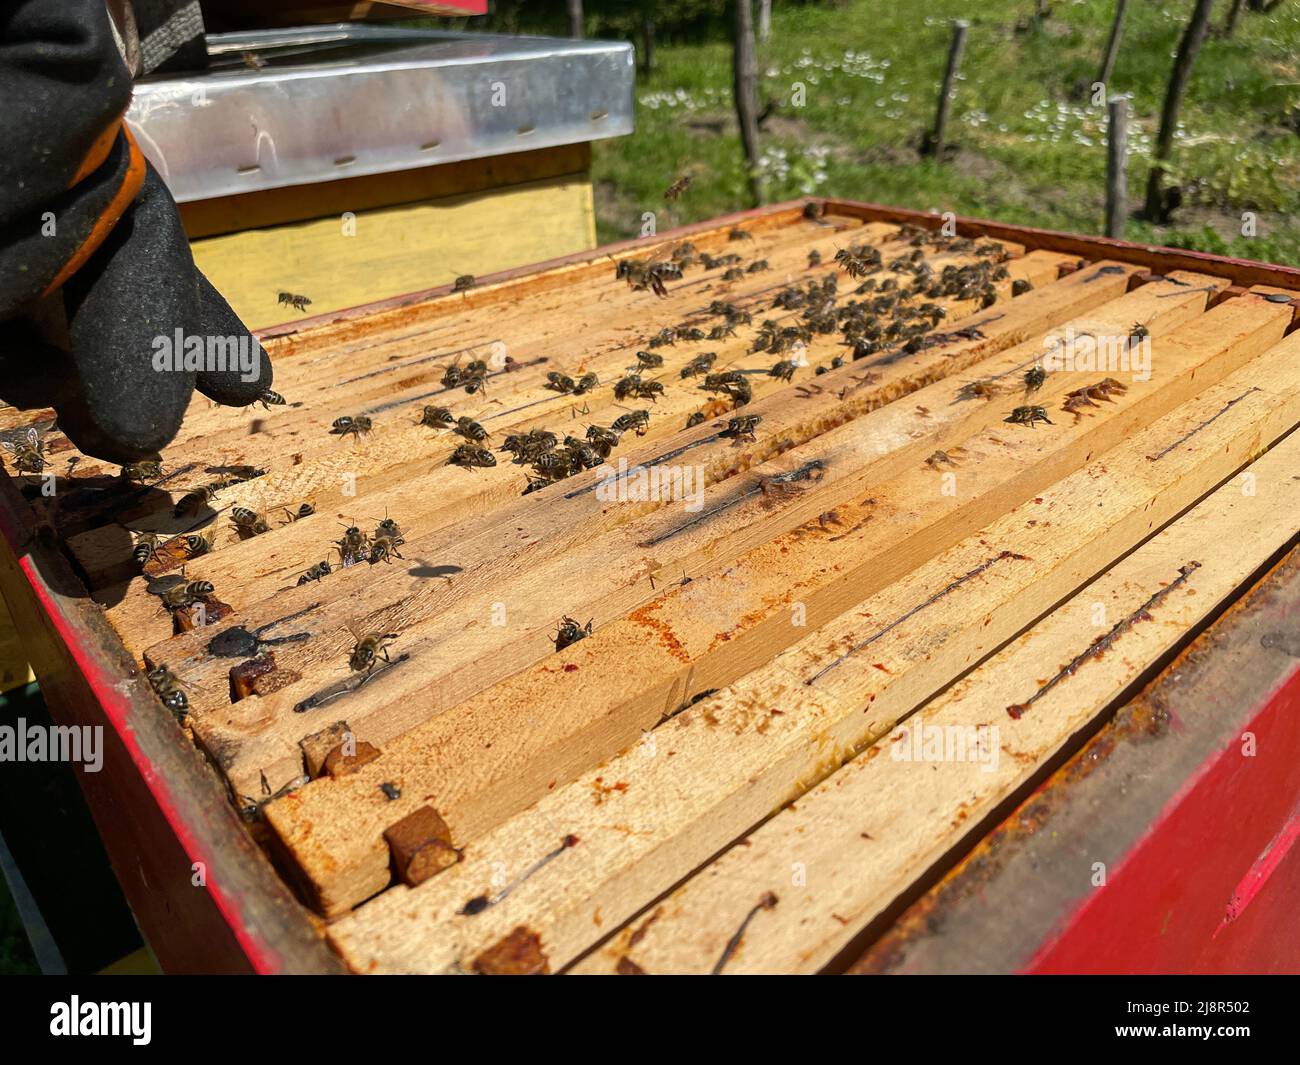 Beekeeper opening a hive frame with honeybees Stock Photo